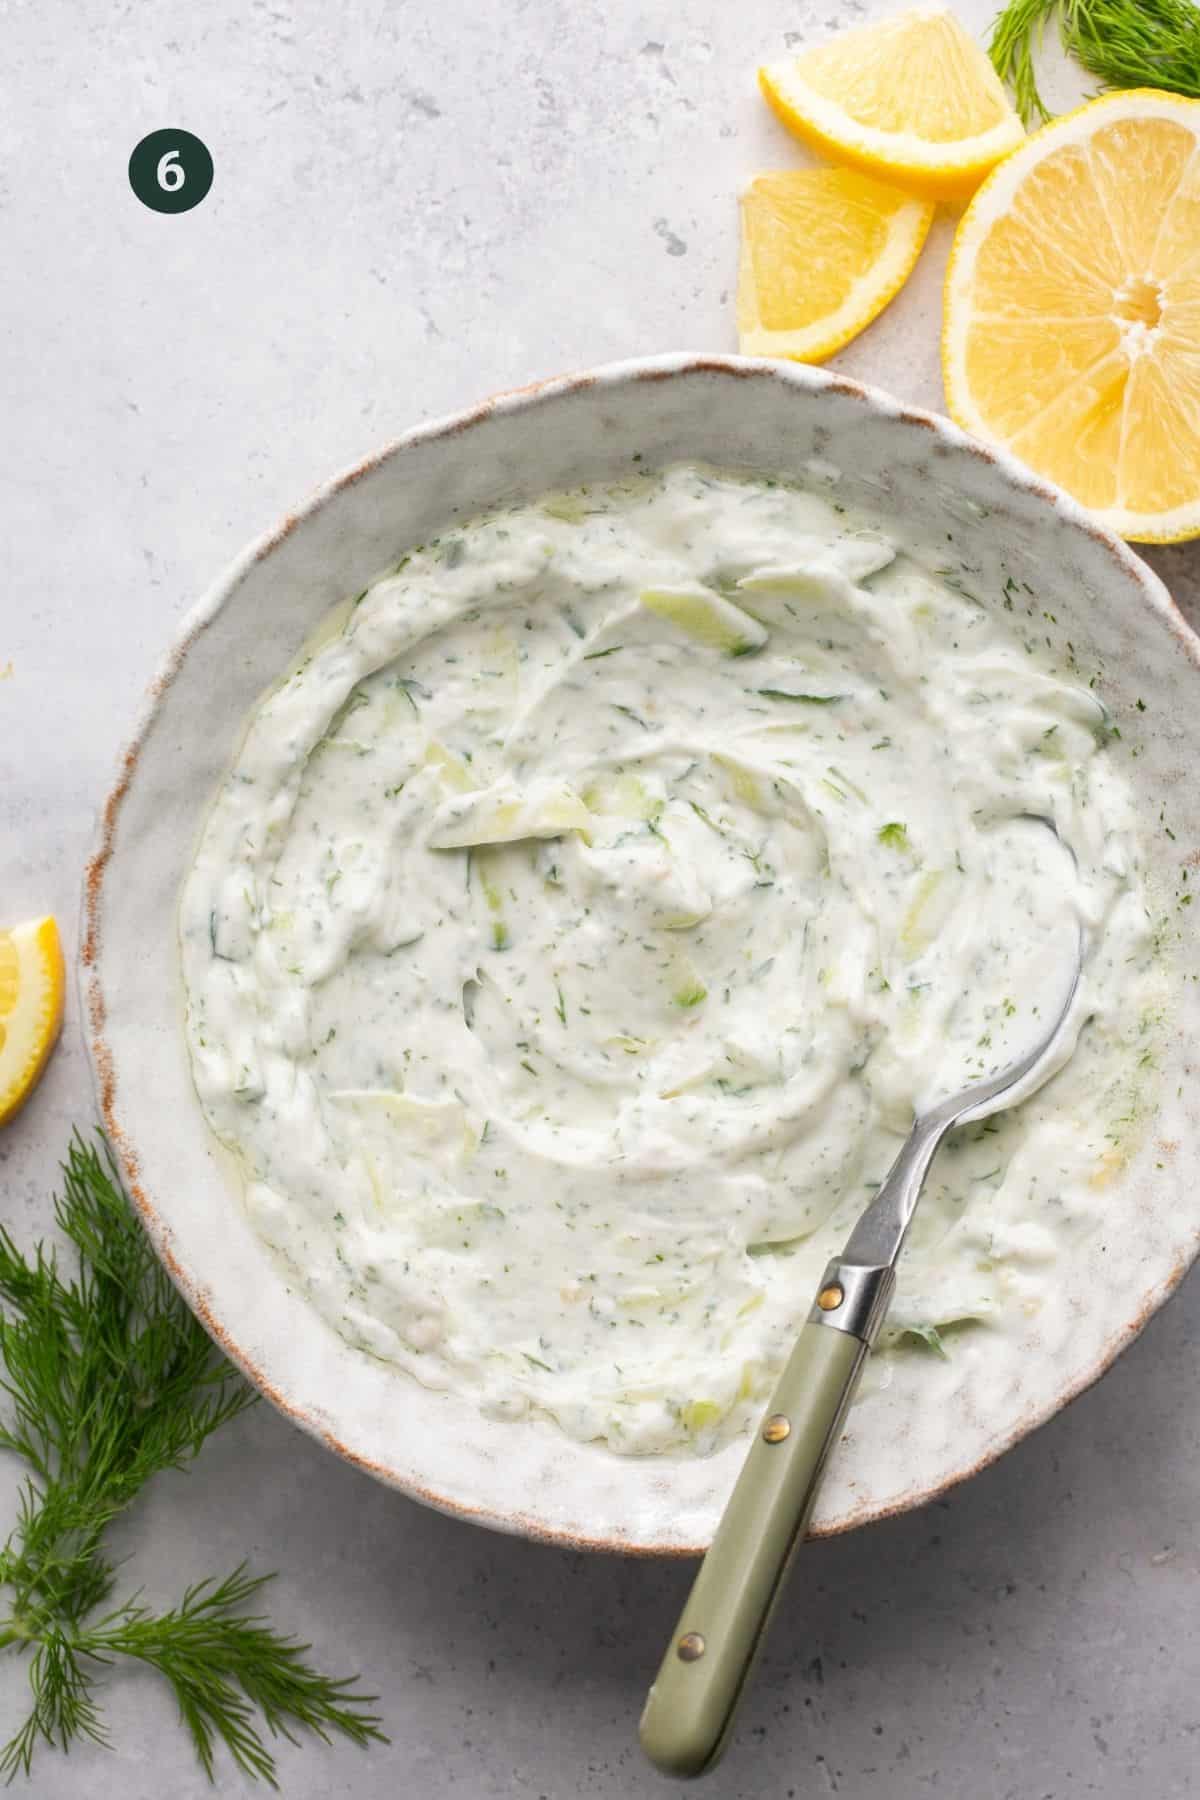 Fully mixed and combined tzatziki sauce. 